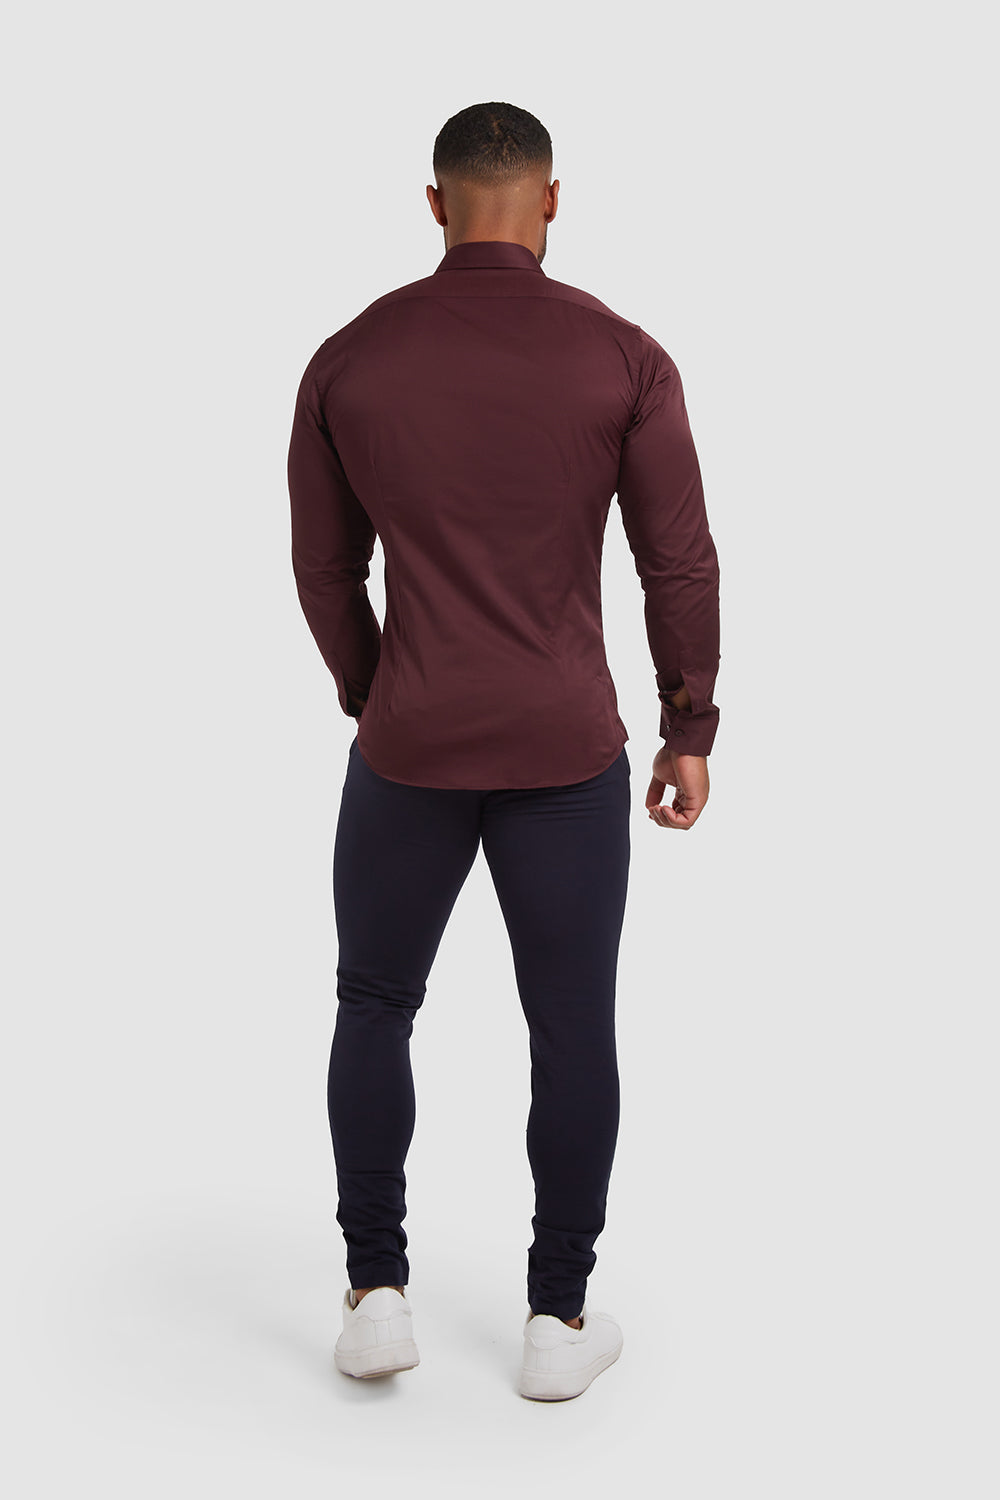 Signature - Fit 2.0 USA Muscle ATHLETE TAILORED Burgundy - in Shirt